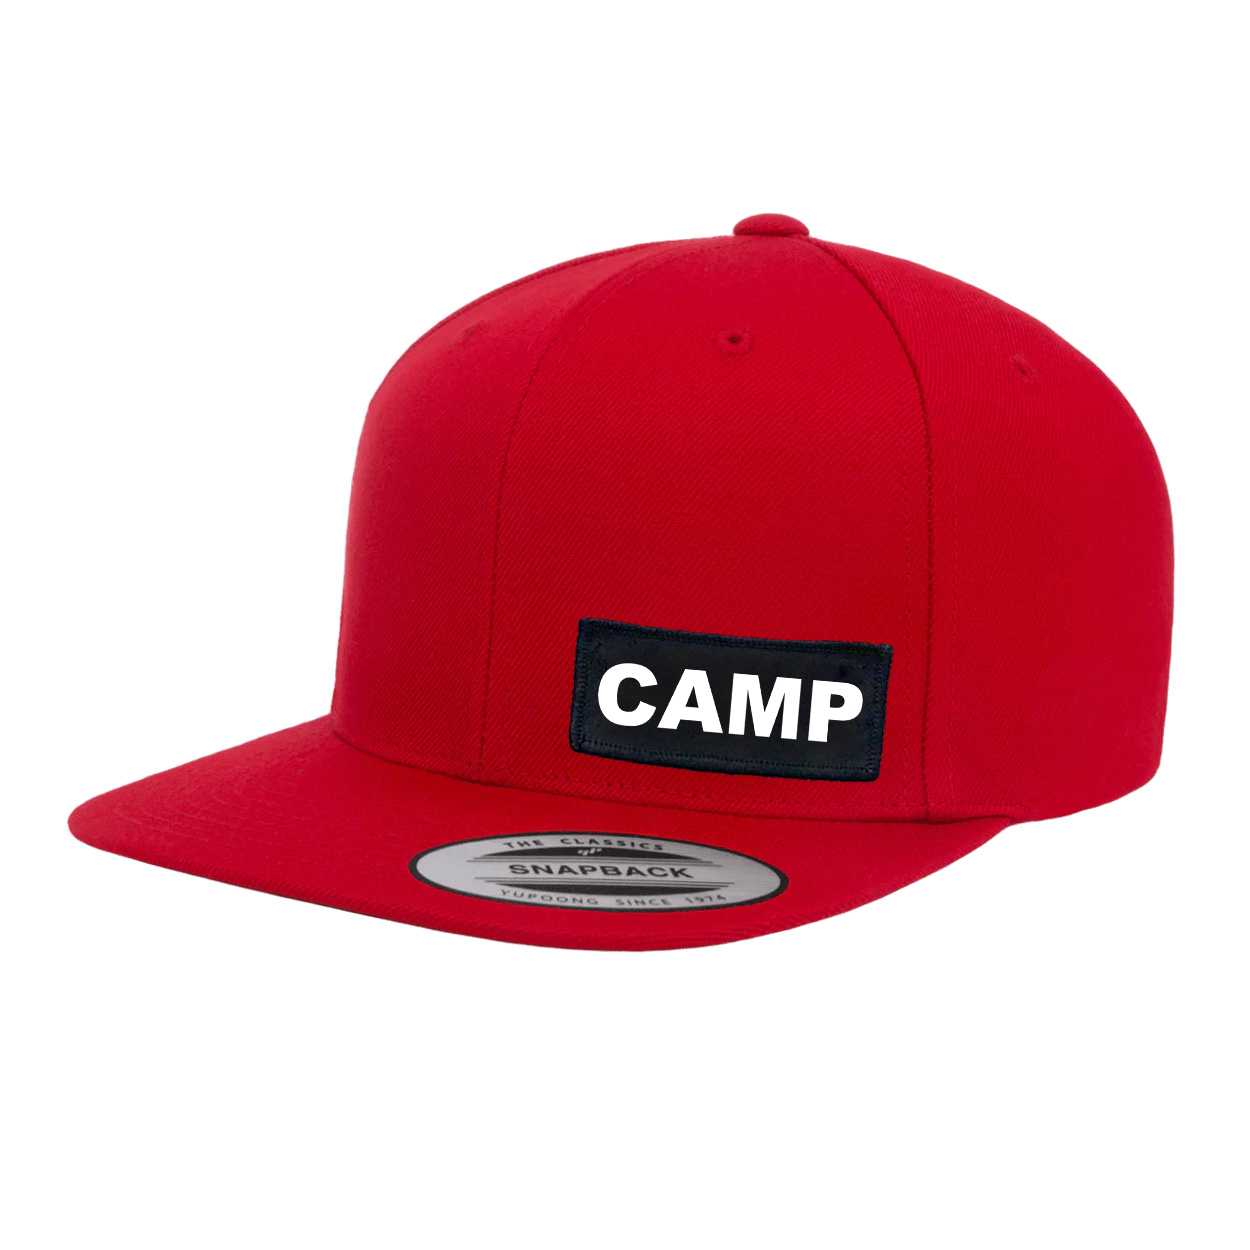 Camp Brand Logo Night Out Woven Patch Snapback Flat Brim Hat Red 